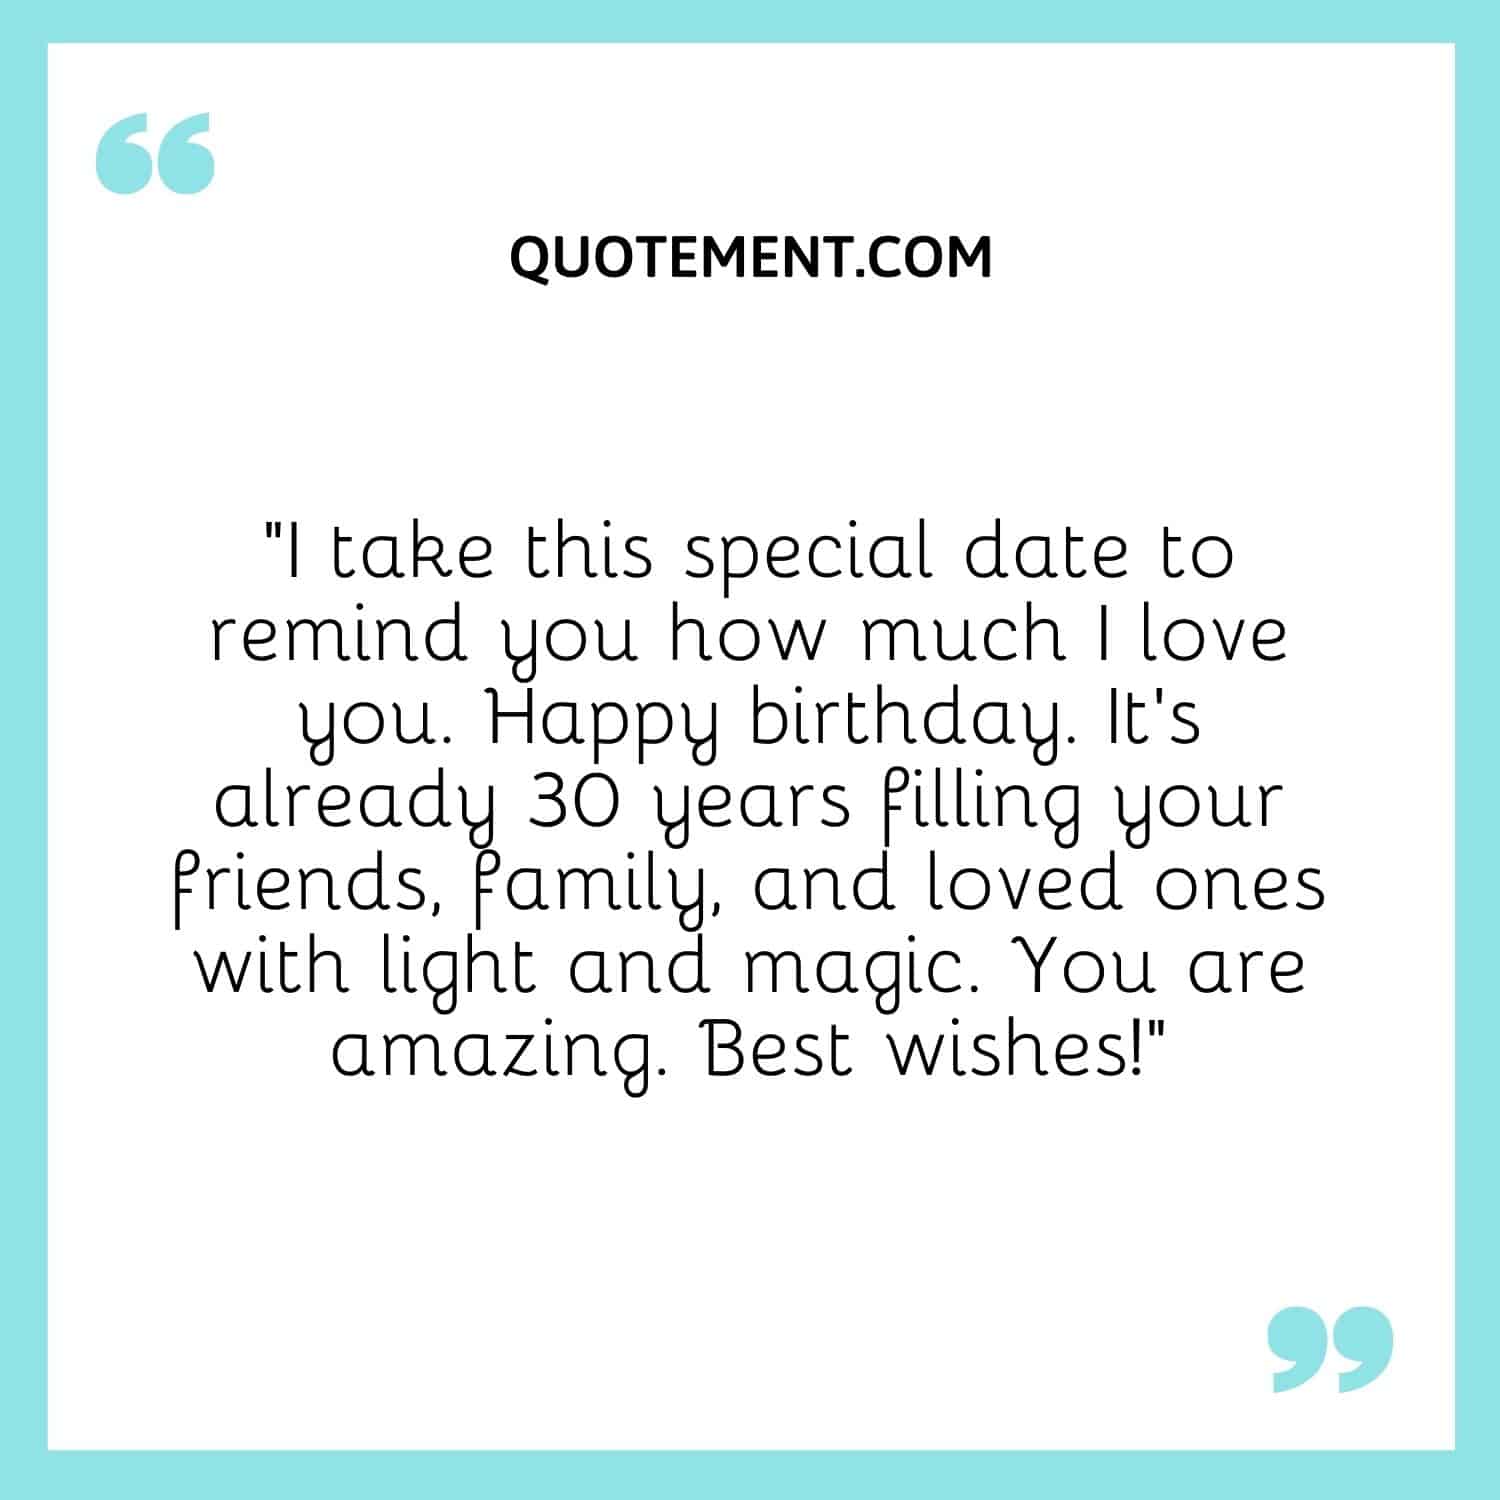 “I take this special date to remind you how much I love you. Happy birthday. It’s already 30 years filling your friends, family, and loved ones with light and magic. You are amazing. Best wishes!”